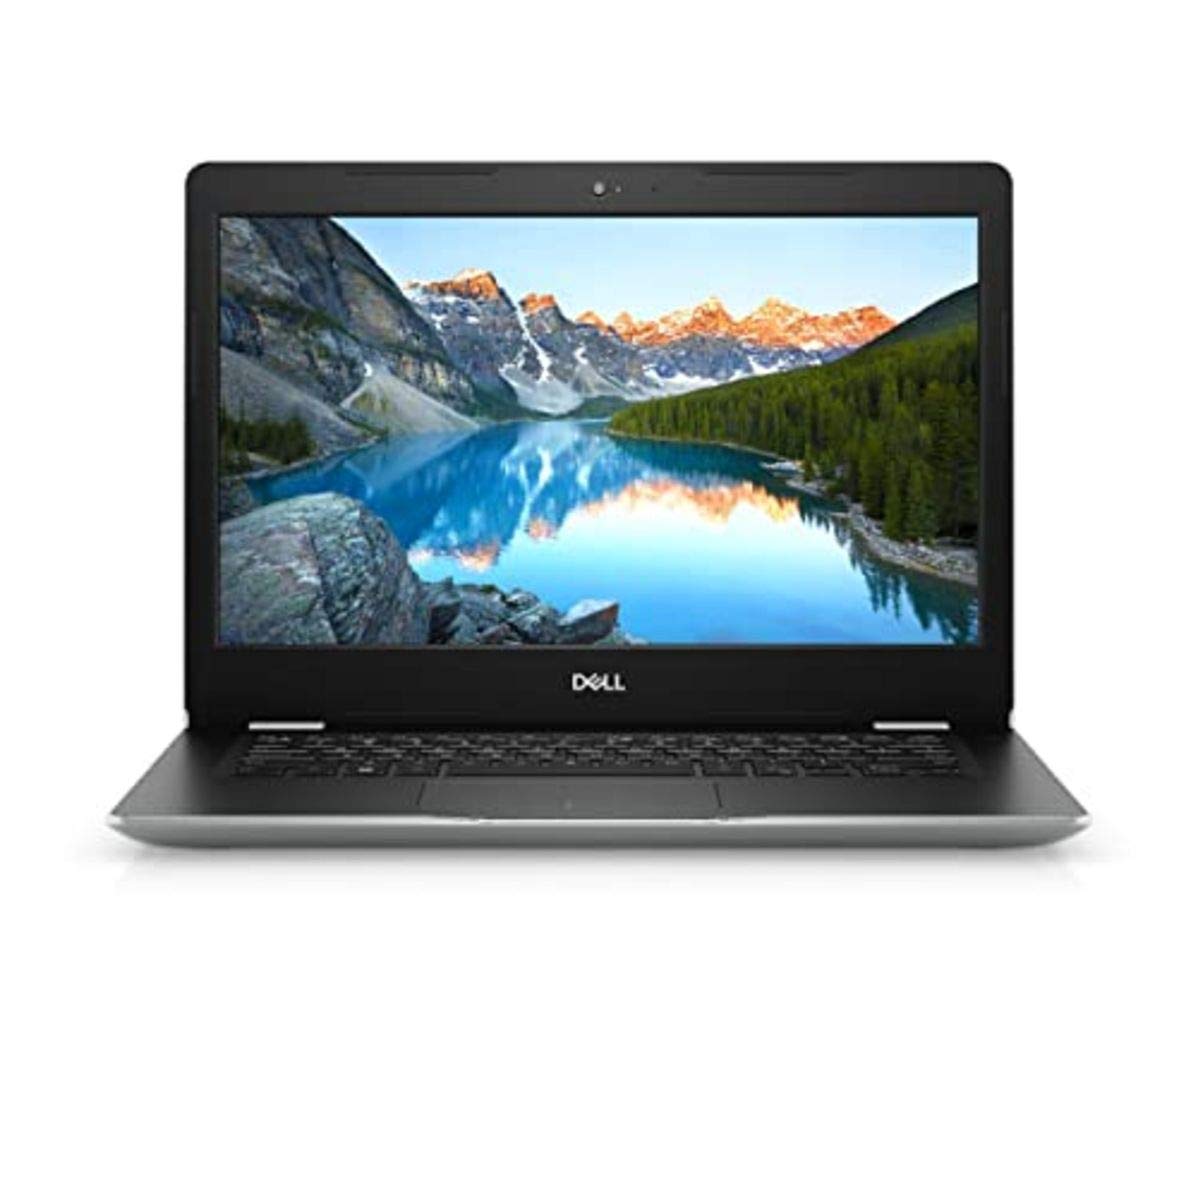 Dell Inspiron 14 3493 Notebook